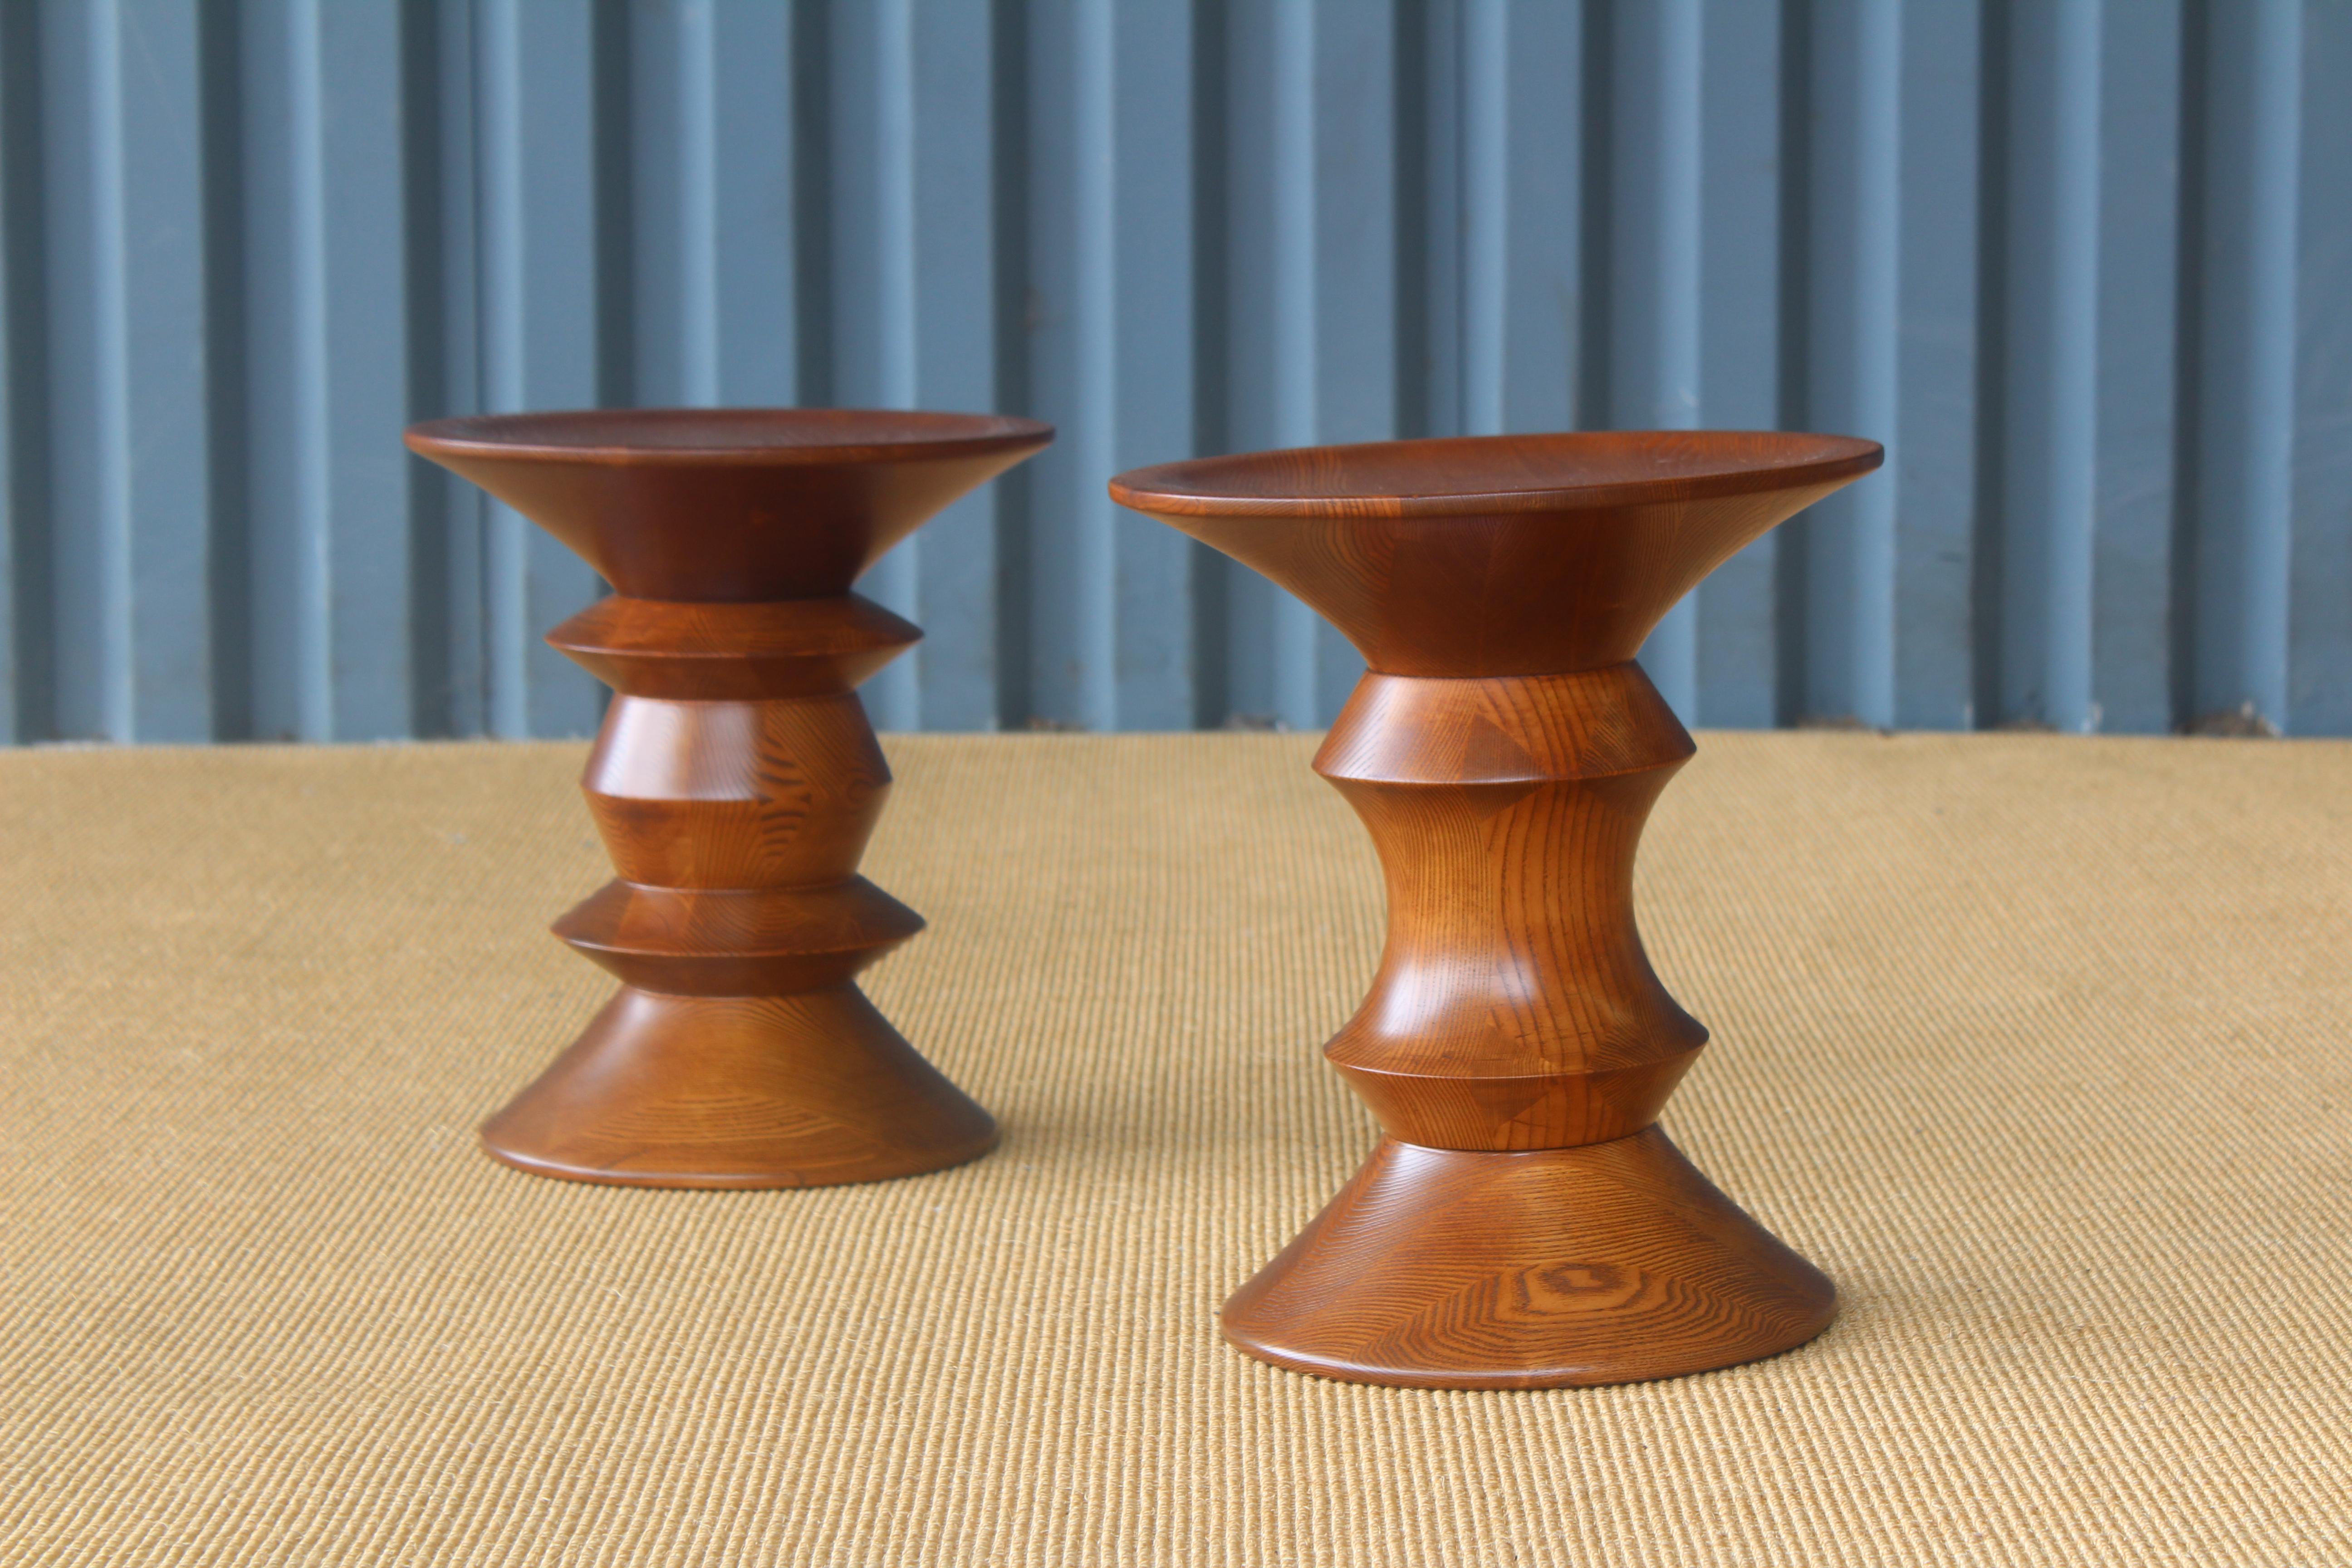 Pair of walnut 'Time Life' stools designed by Ray and Charles Eames. Recently refinished.